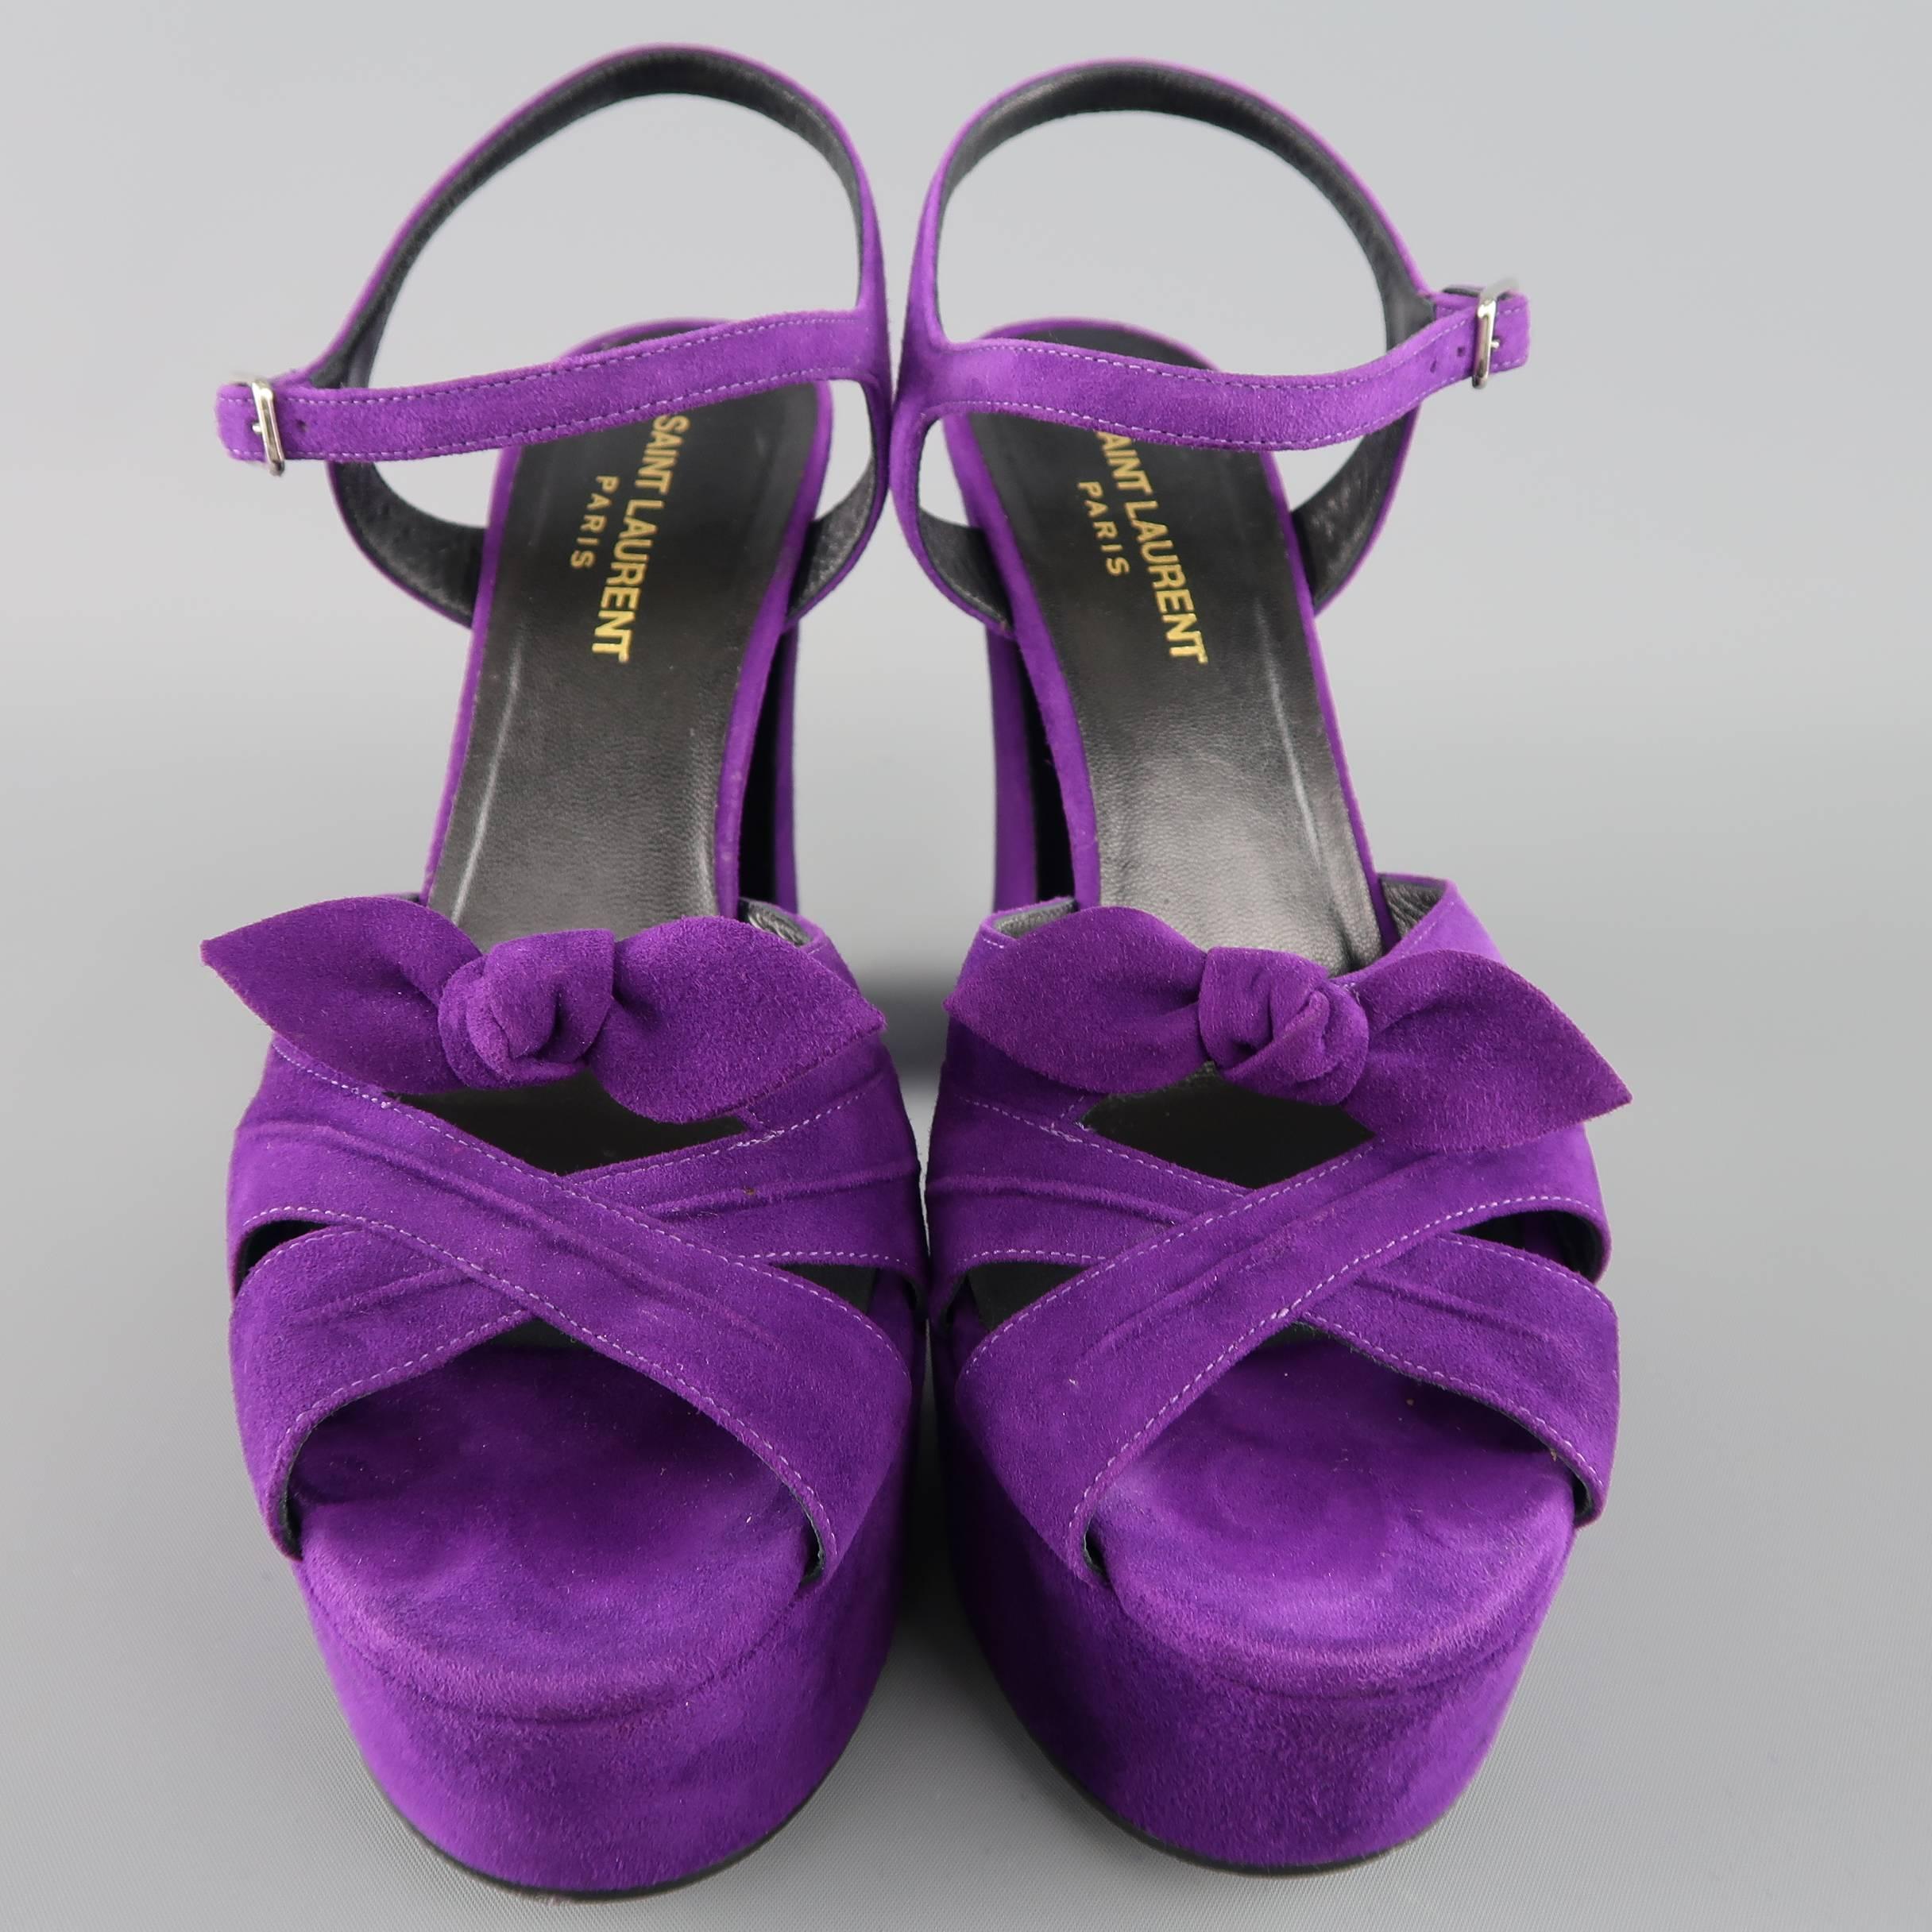 SAINT LAURENT "Candy" sandals come in bold purple suede and feature a thick crossed toe strap with bow, ankle harness, and chunky retro platform. Made in Italy.
 
Excellent Pre-Owned Condition.
Marked: IT 38.5
 
Measurements:
 
Heel: 5.10